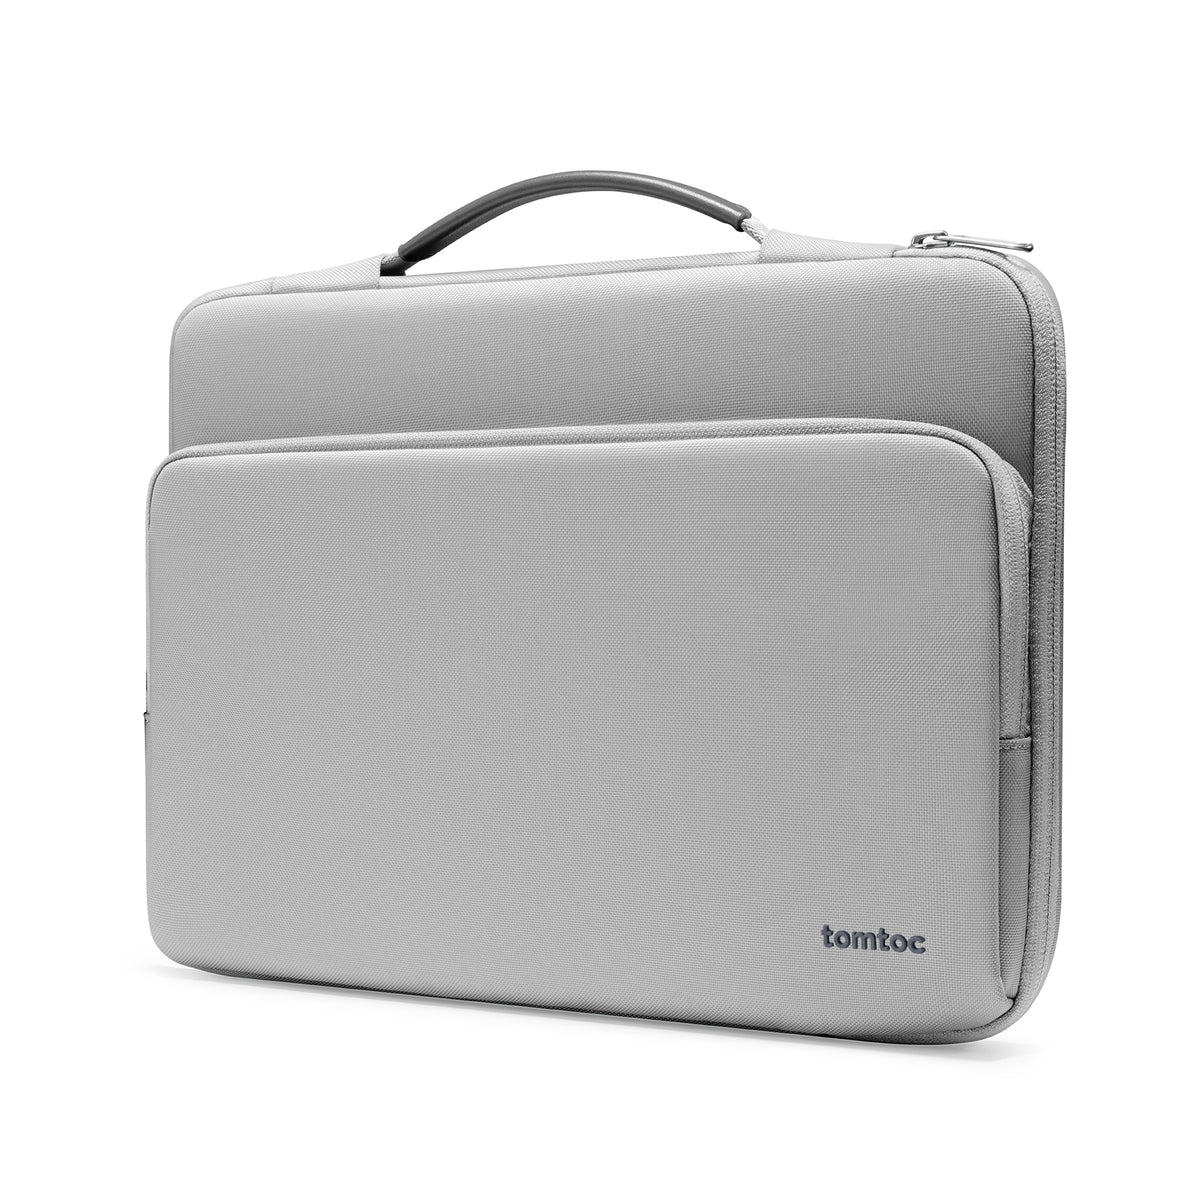 tomtoc 14 Inch Versatile 360 Protective Laptop Sleeve Briefcase - Gray